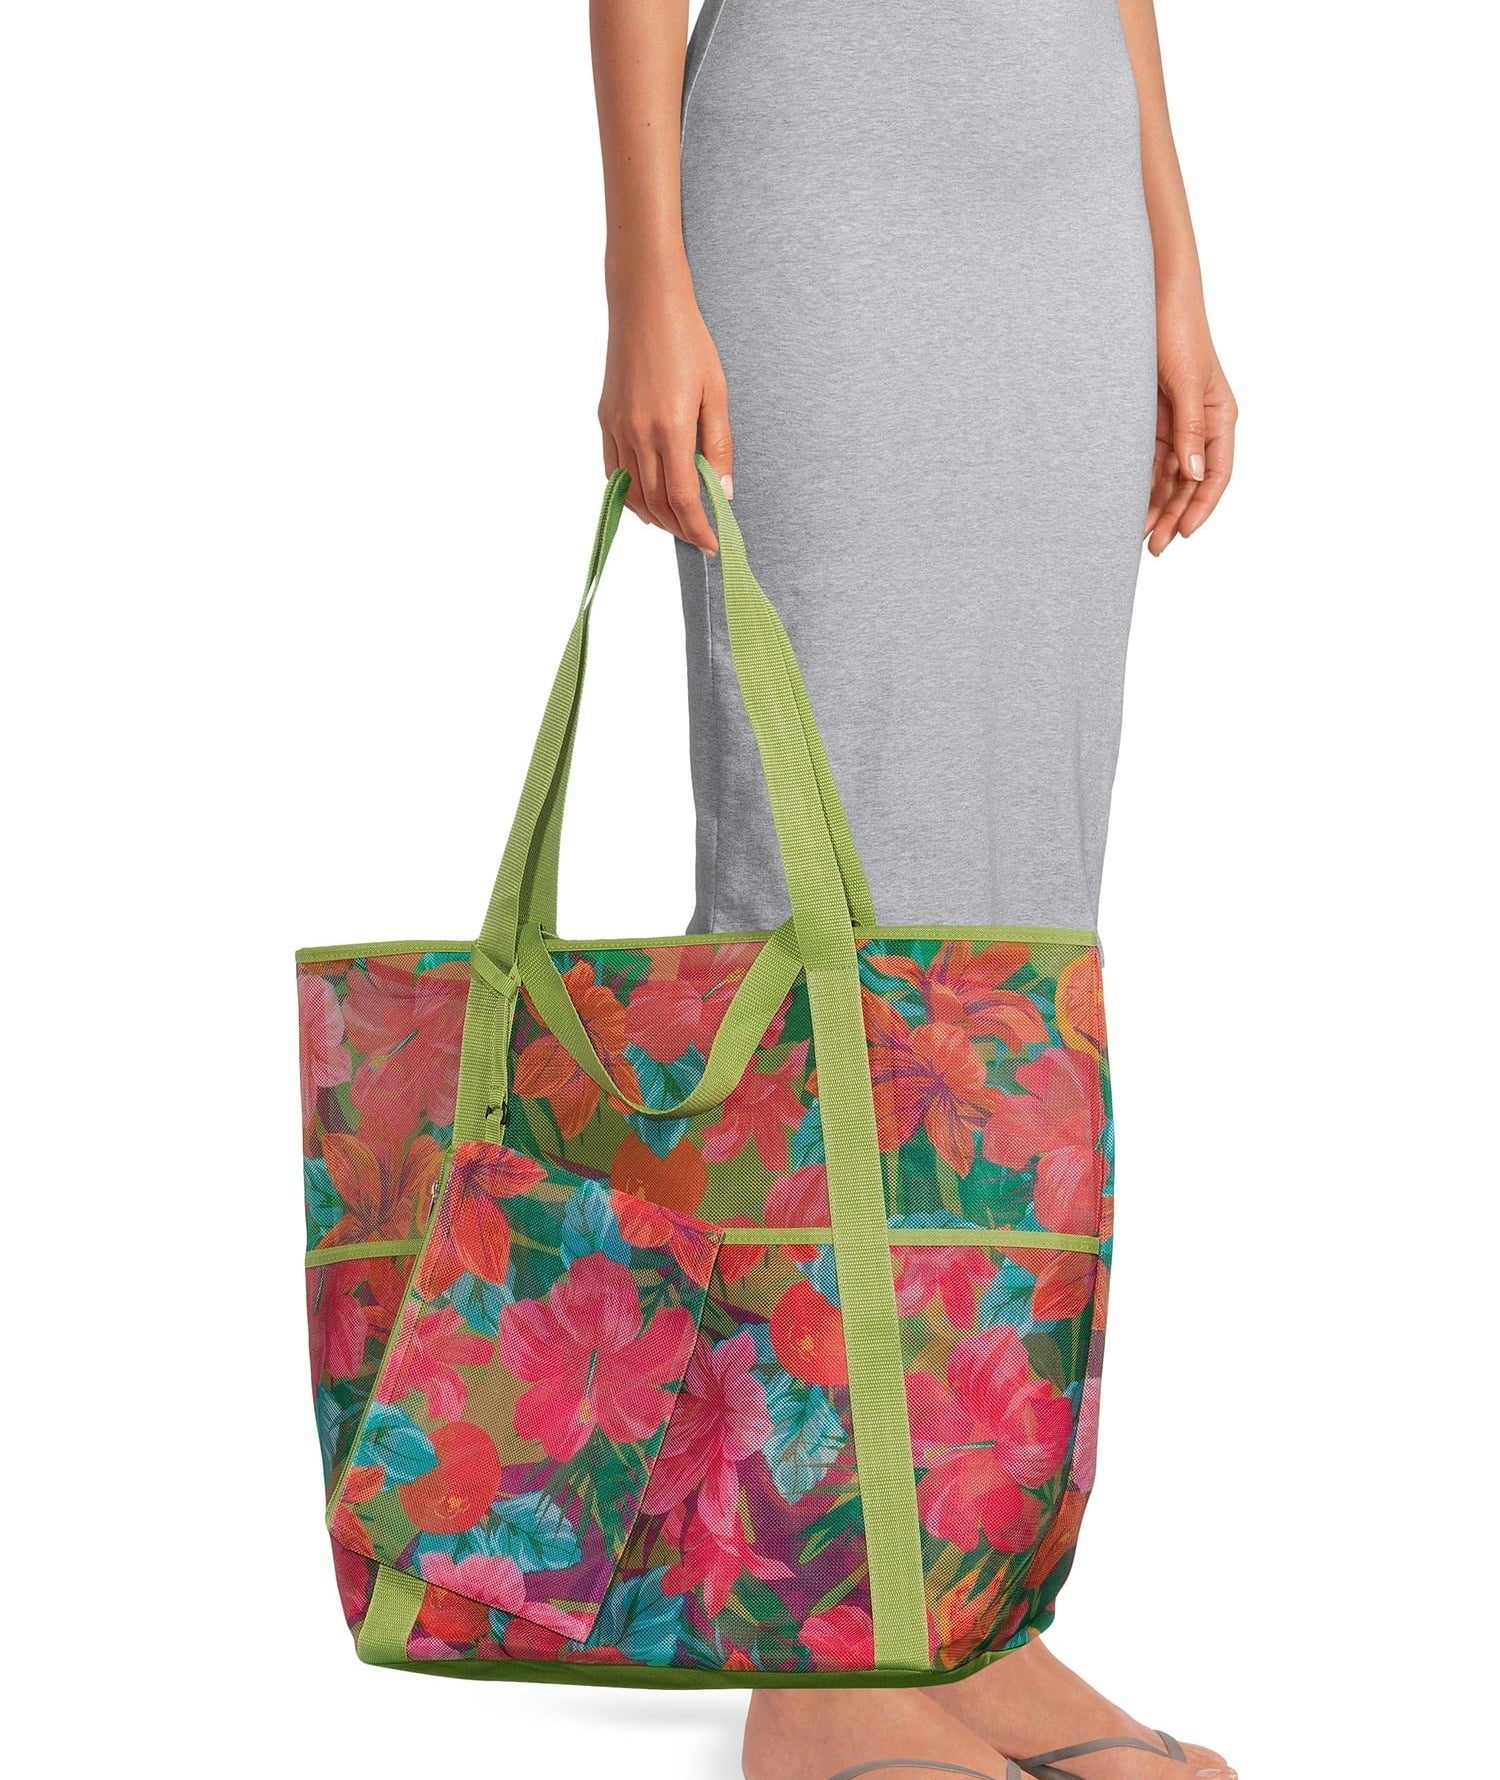 a model holding the tote featuring a multicolor floral print